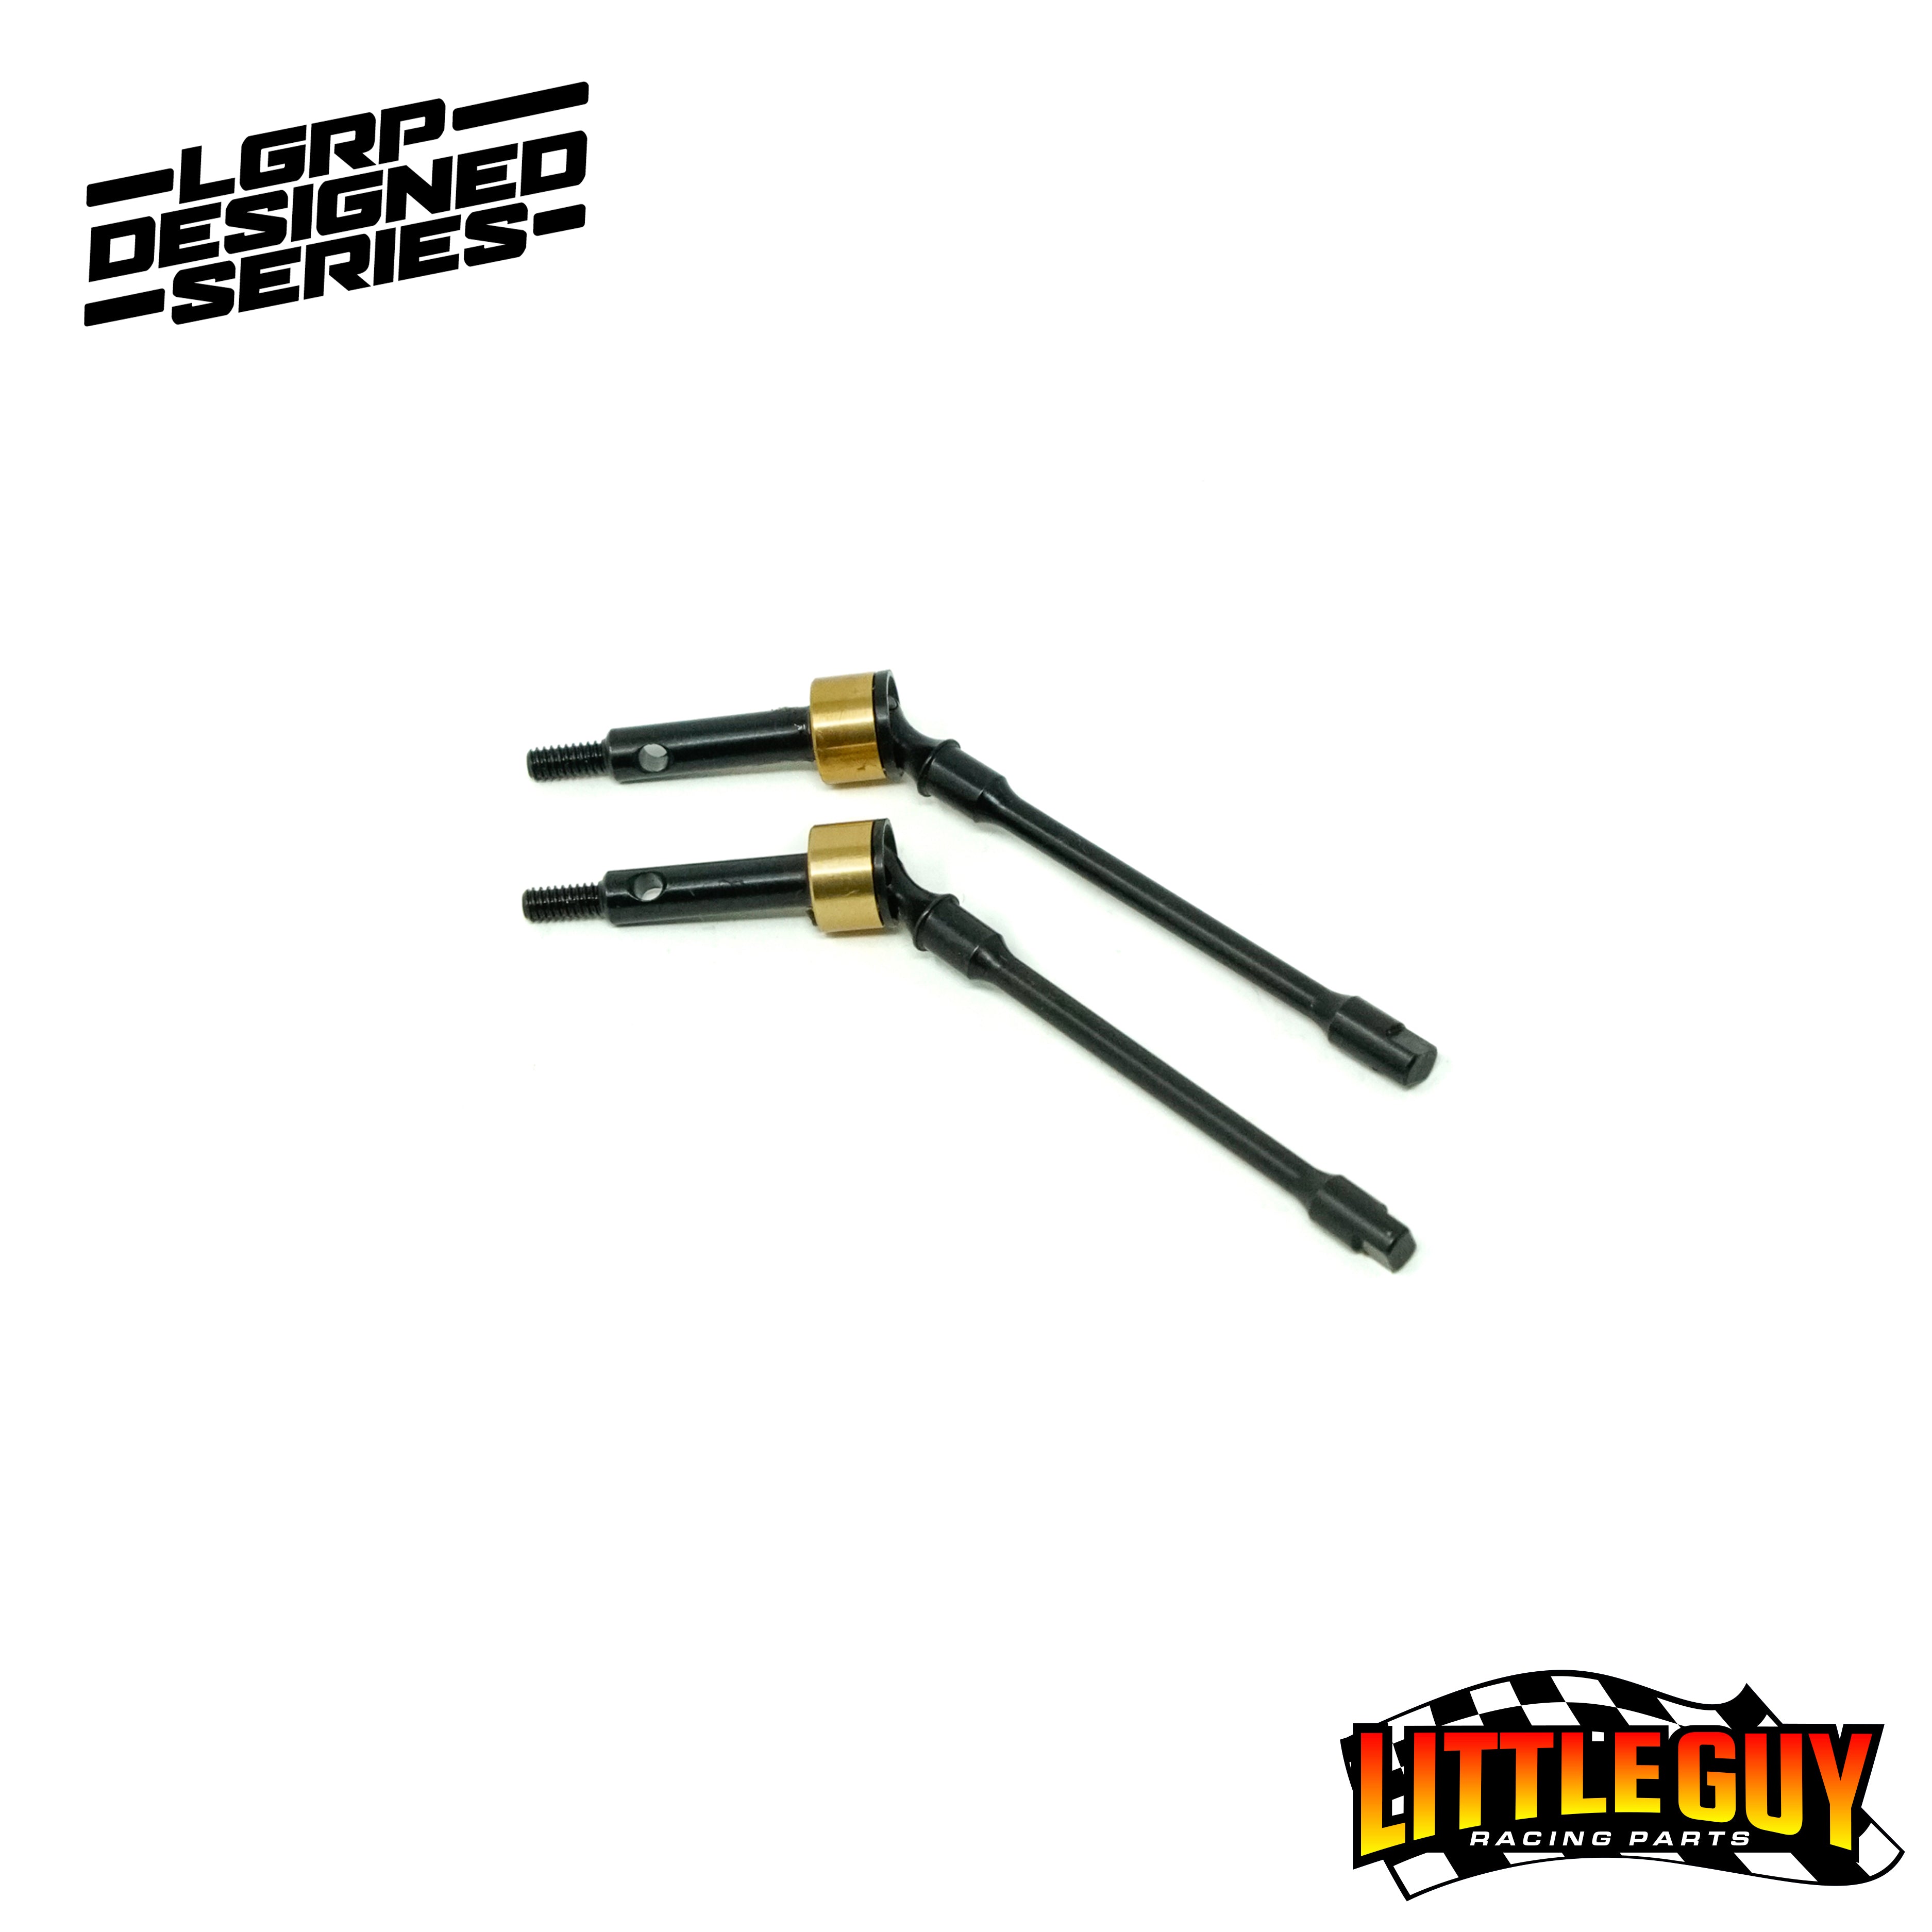 SUPER 8 EXTREME CVD AXLE SHAFTS